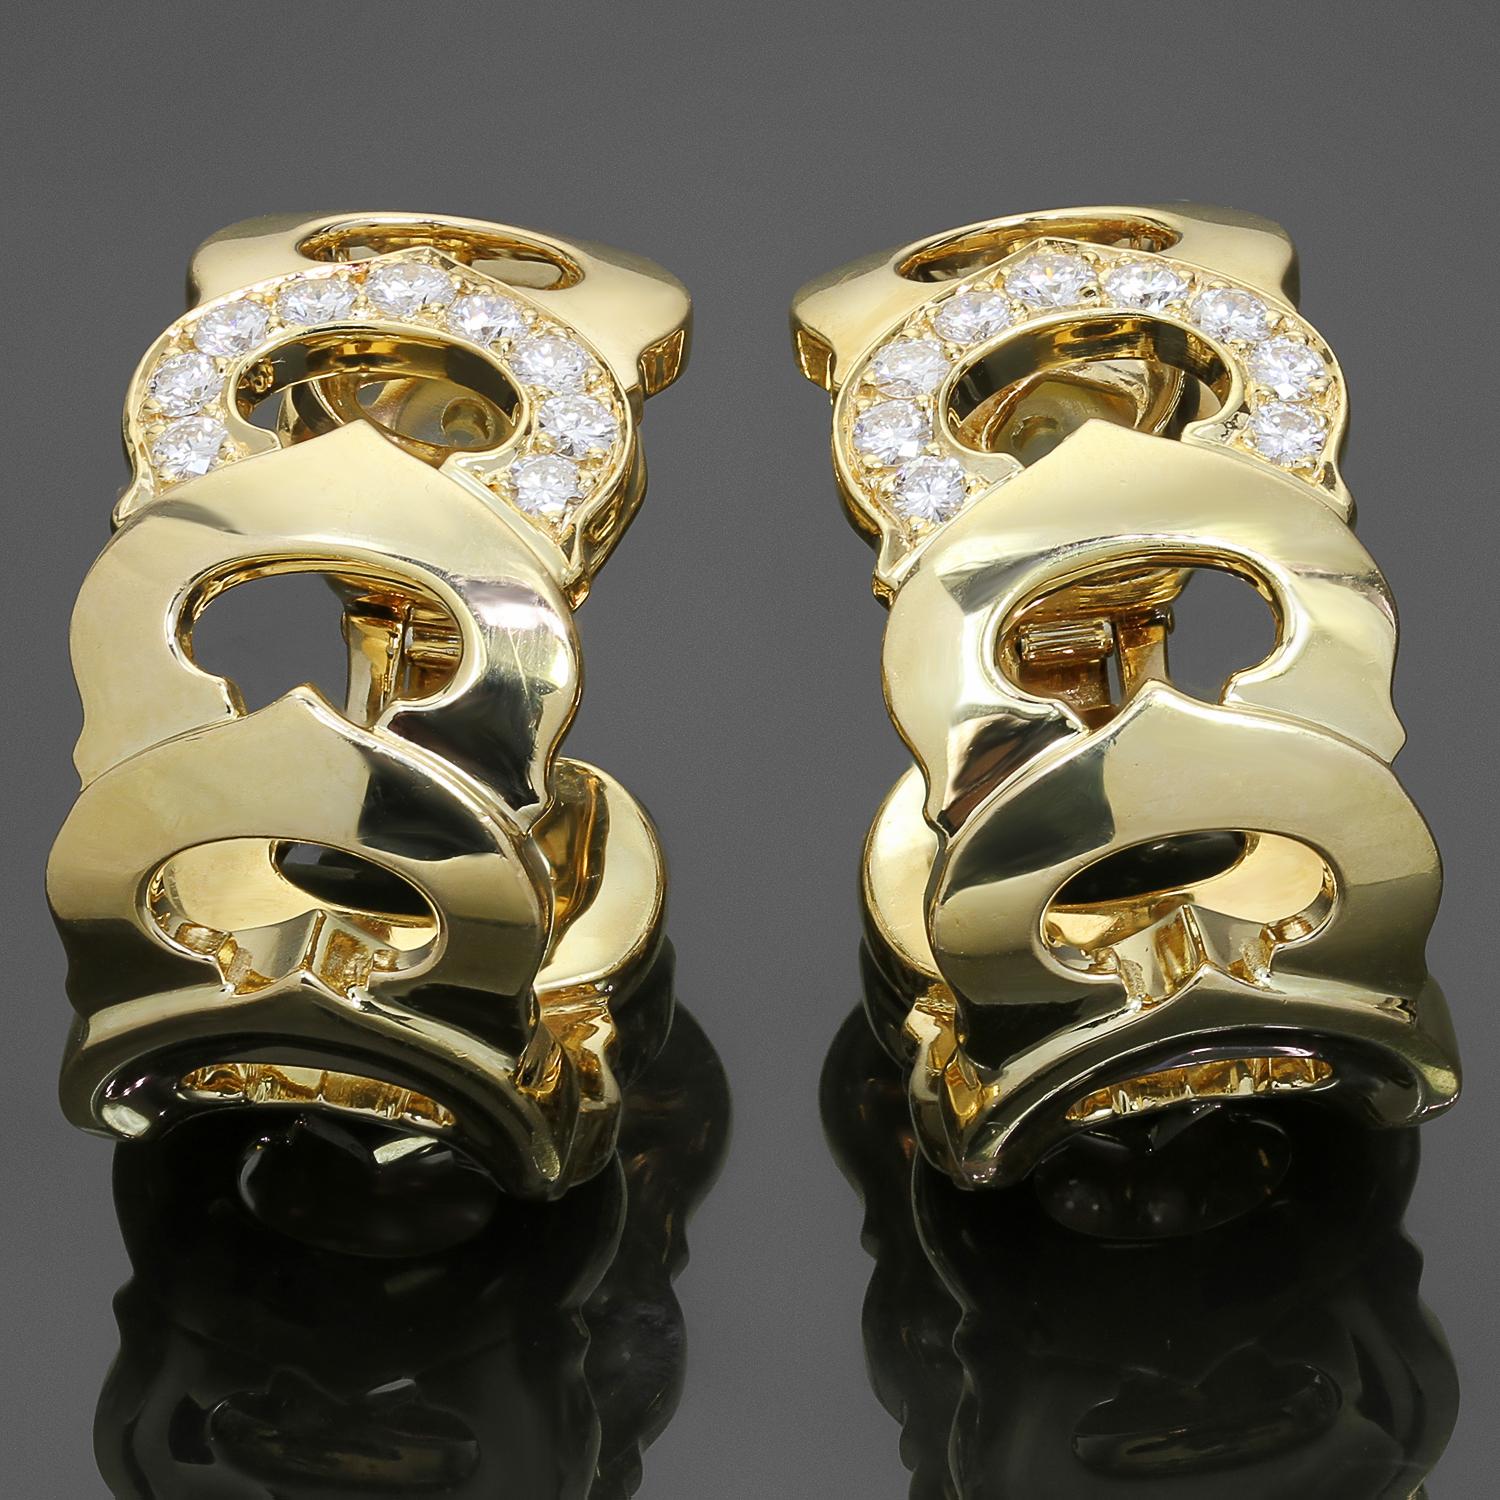 These exquisite authentic C De Cartier clip-on wrap earrings are crafted in 18k yellow gold and set with round brilliant D-E-F VVS1-VVS2 diamonds weighing an estimated 1.0 carats. Made in France circa 1990s. Measurements: 0.55